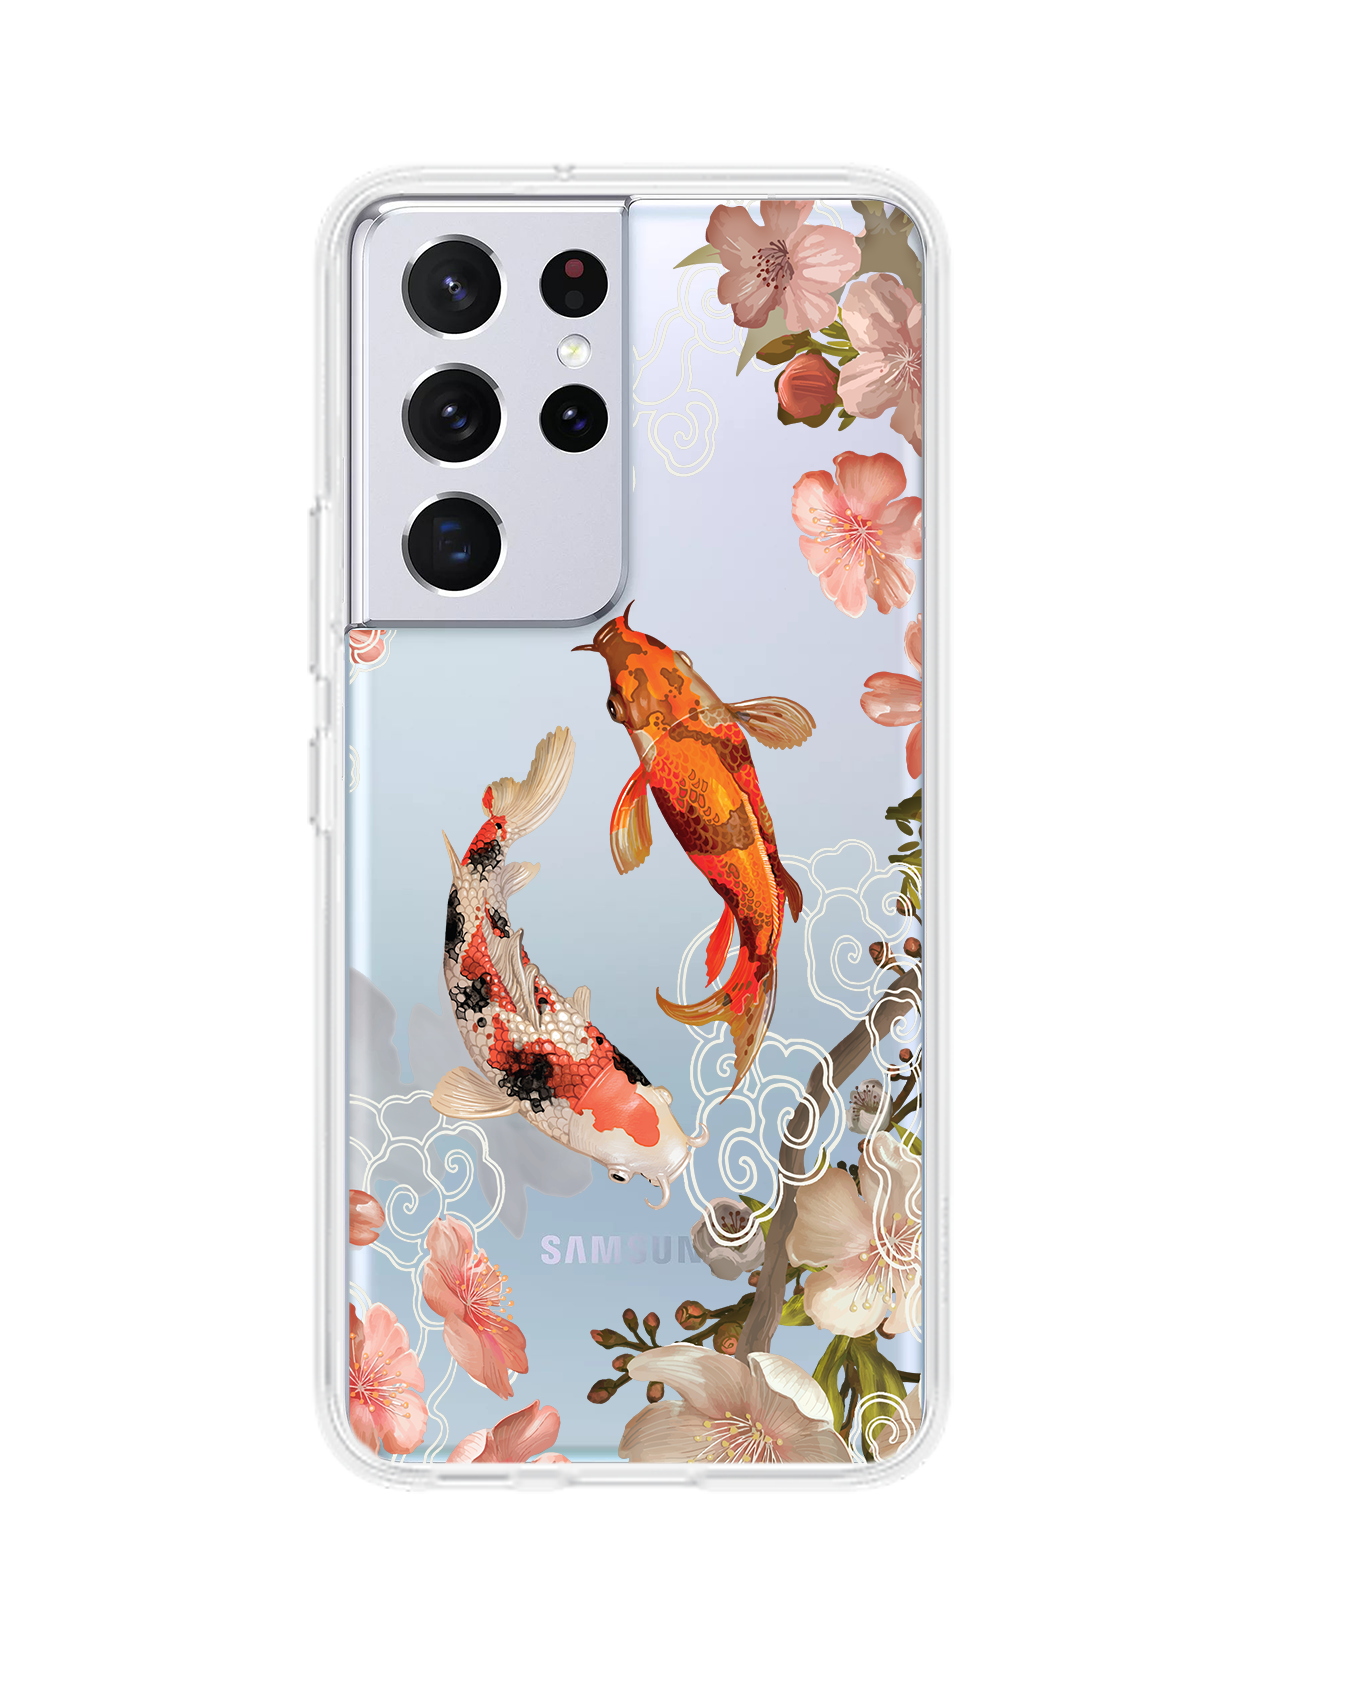 Android Rearguard Hybrid Case - Oil Painting Koi